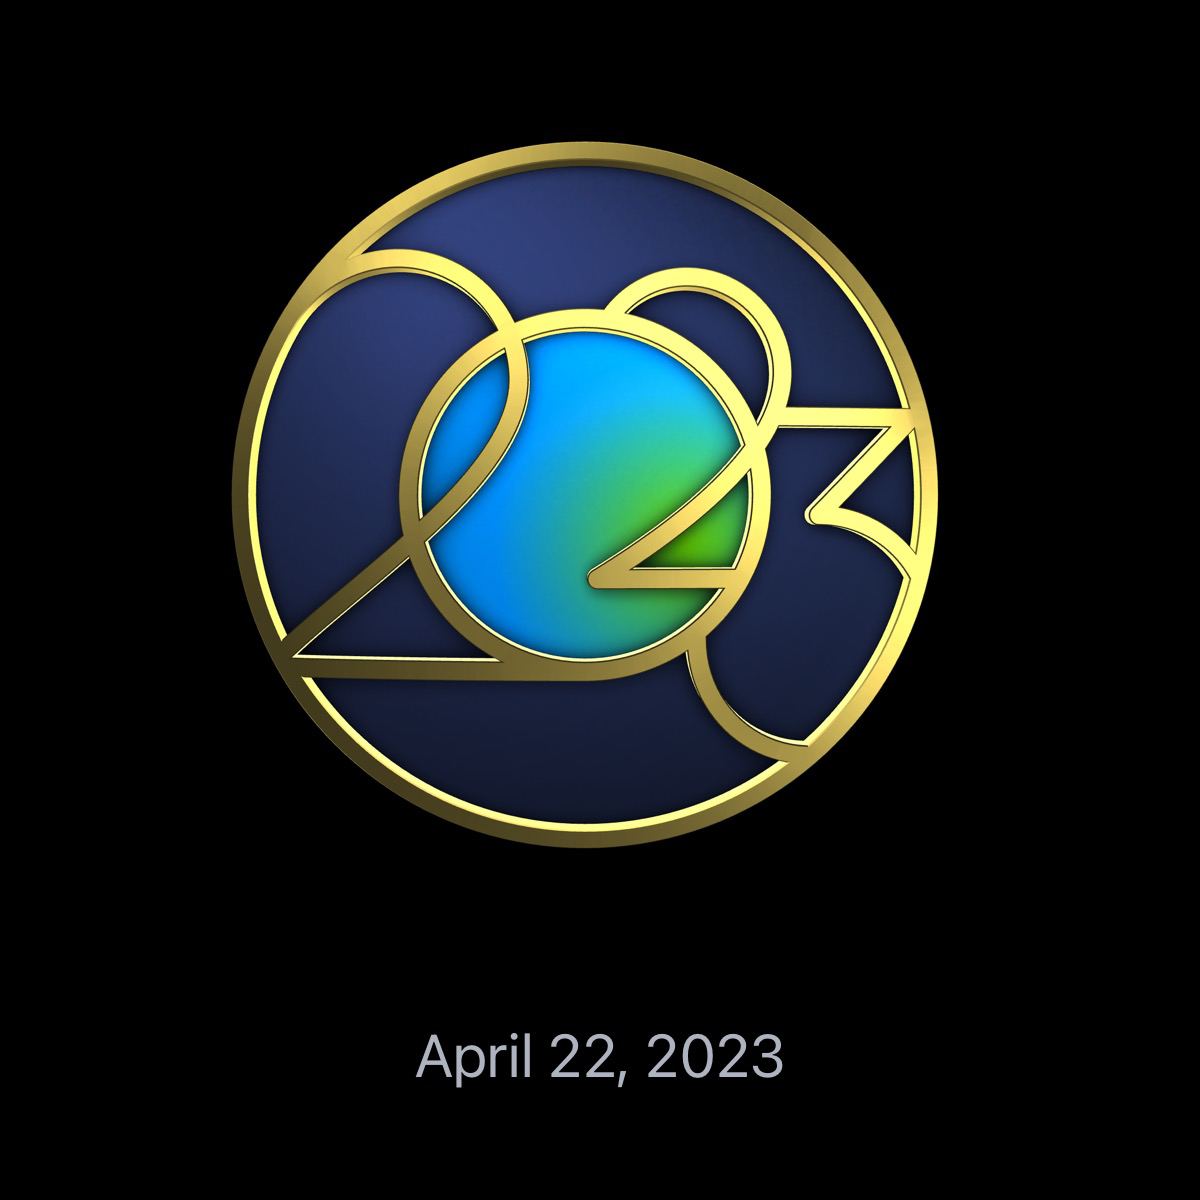 Apple Watch award badge for earth day 2023.